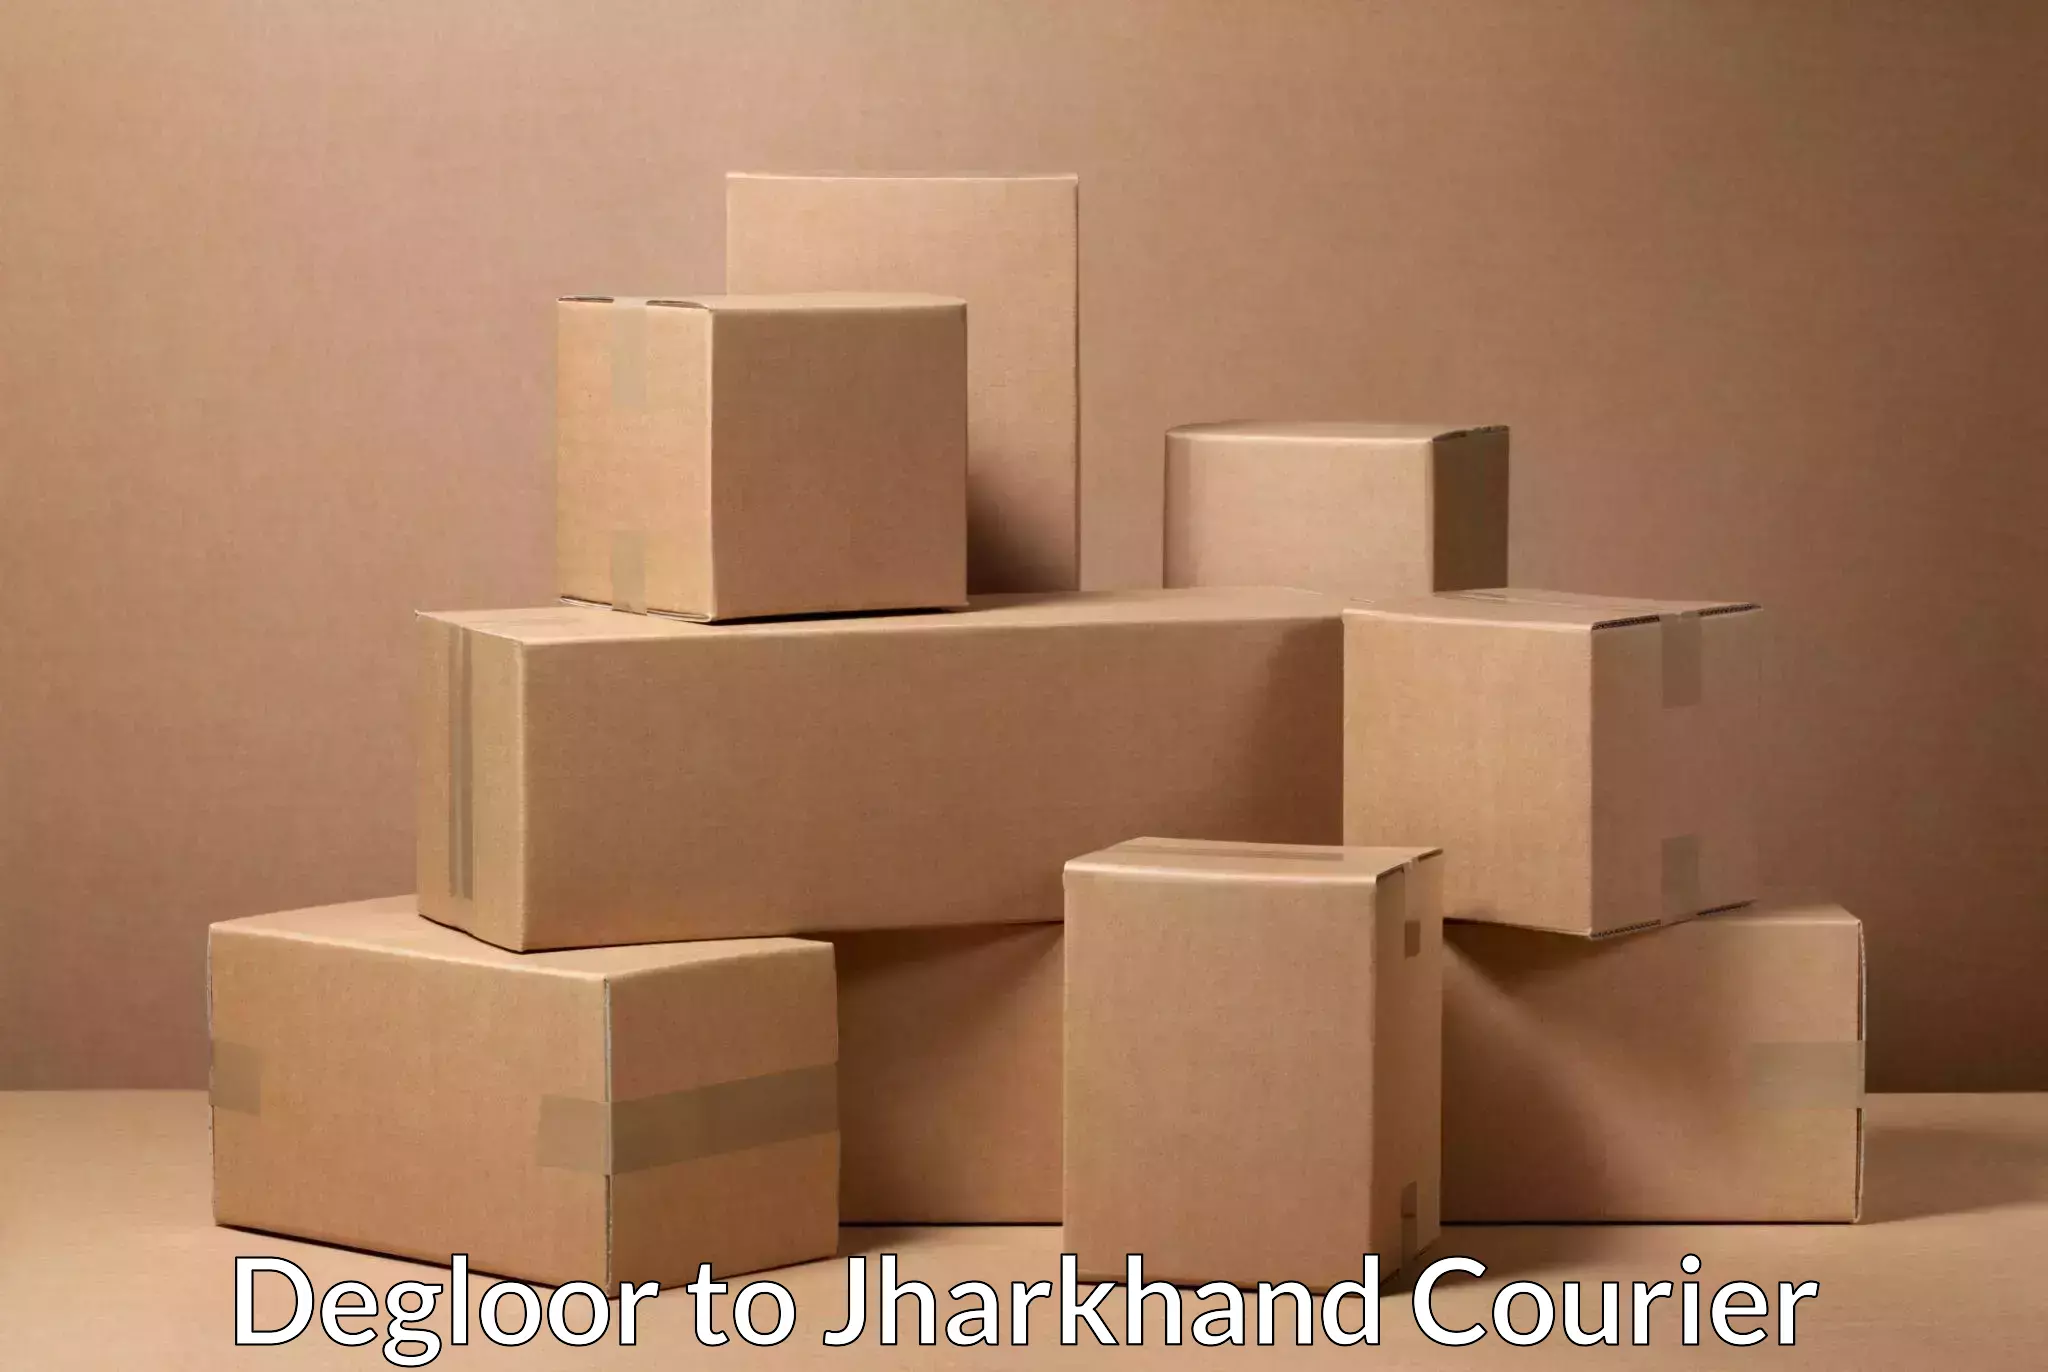 Rural area delivery Degloor to Jharkhand